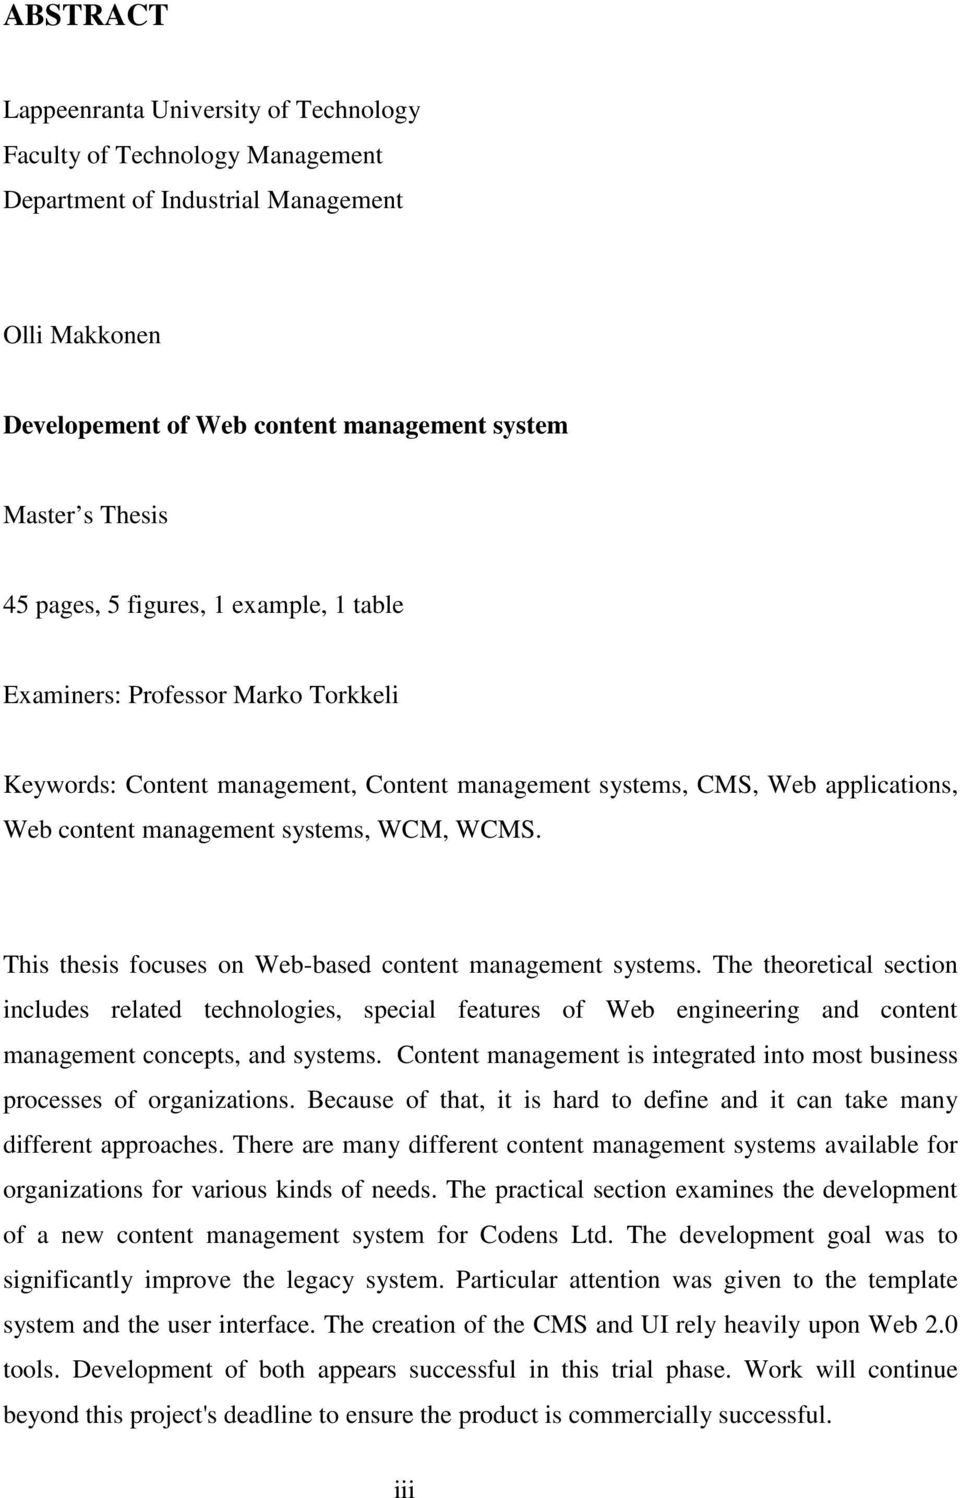 This thesis focuses on Web-based content management systems. The theoretical section includes related technologies, special features of Web engineering and content management concepts, and systems.